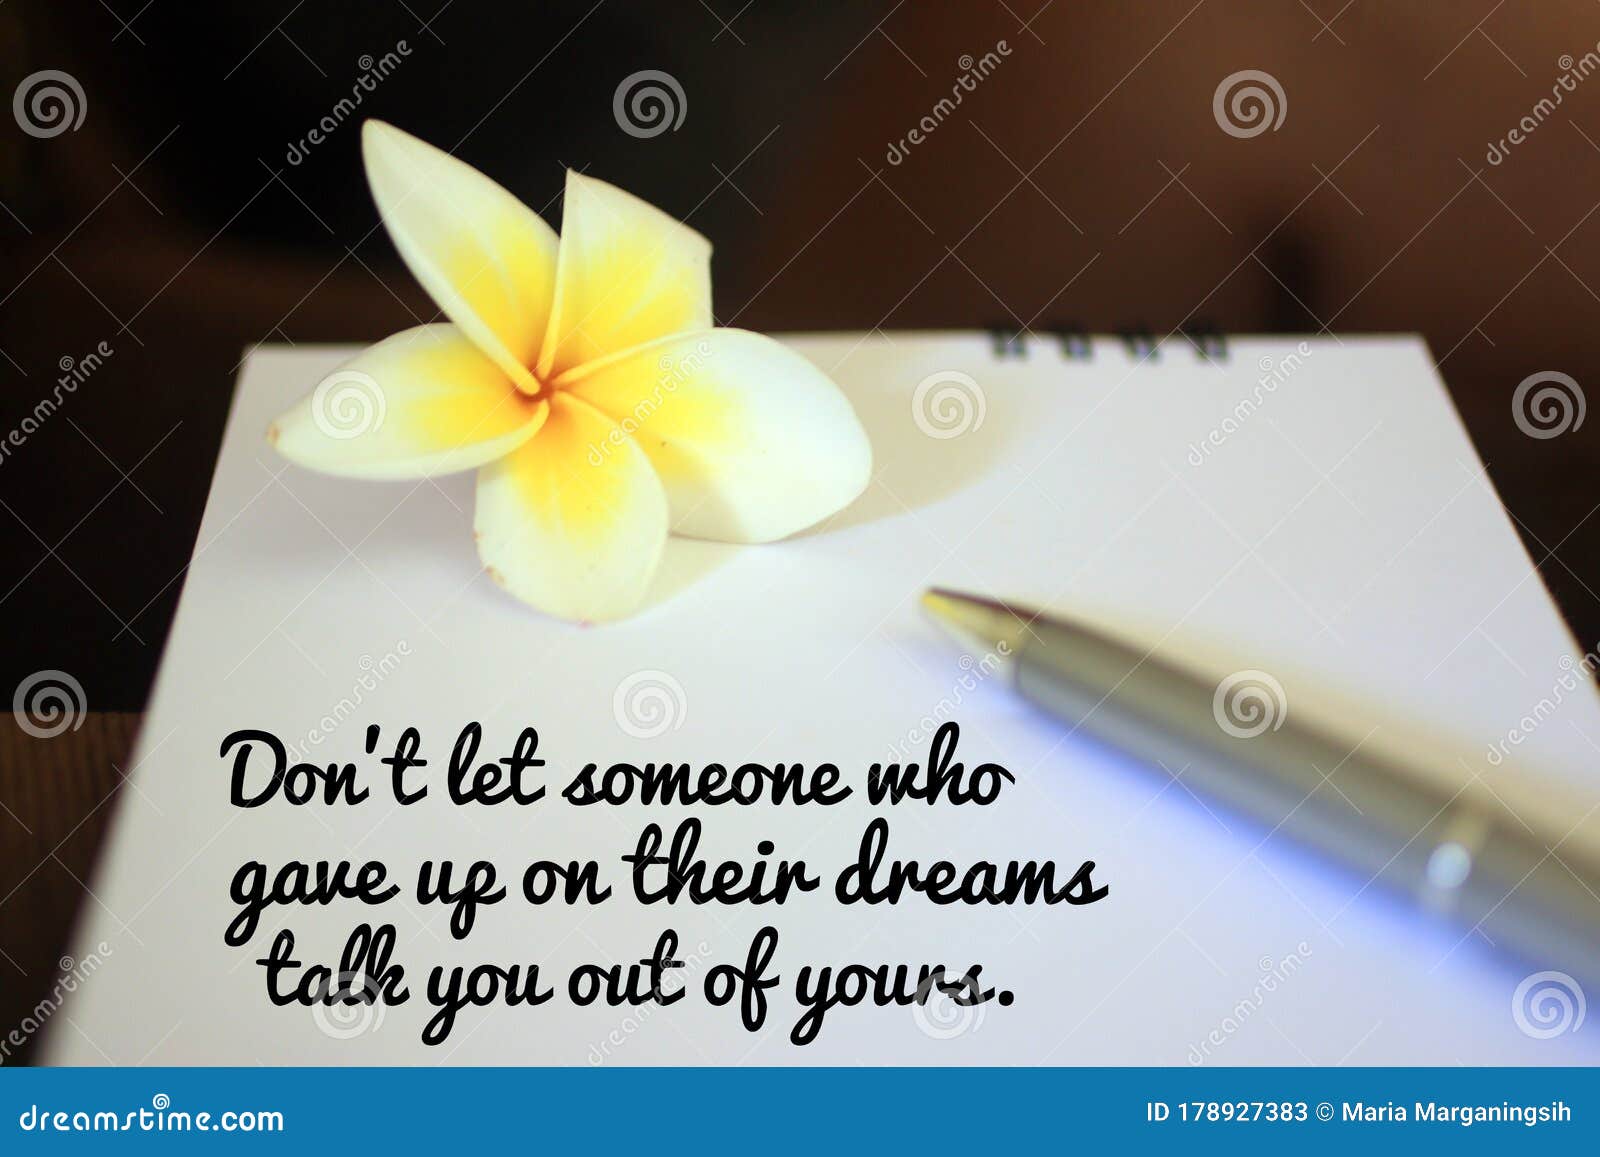 inspirational motivational quote - do not let someone who gave up on their dreams talk you out of yours. message on notebook.